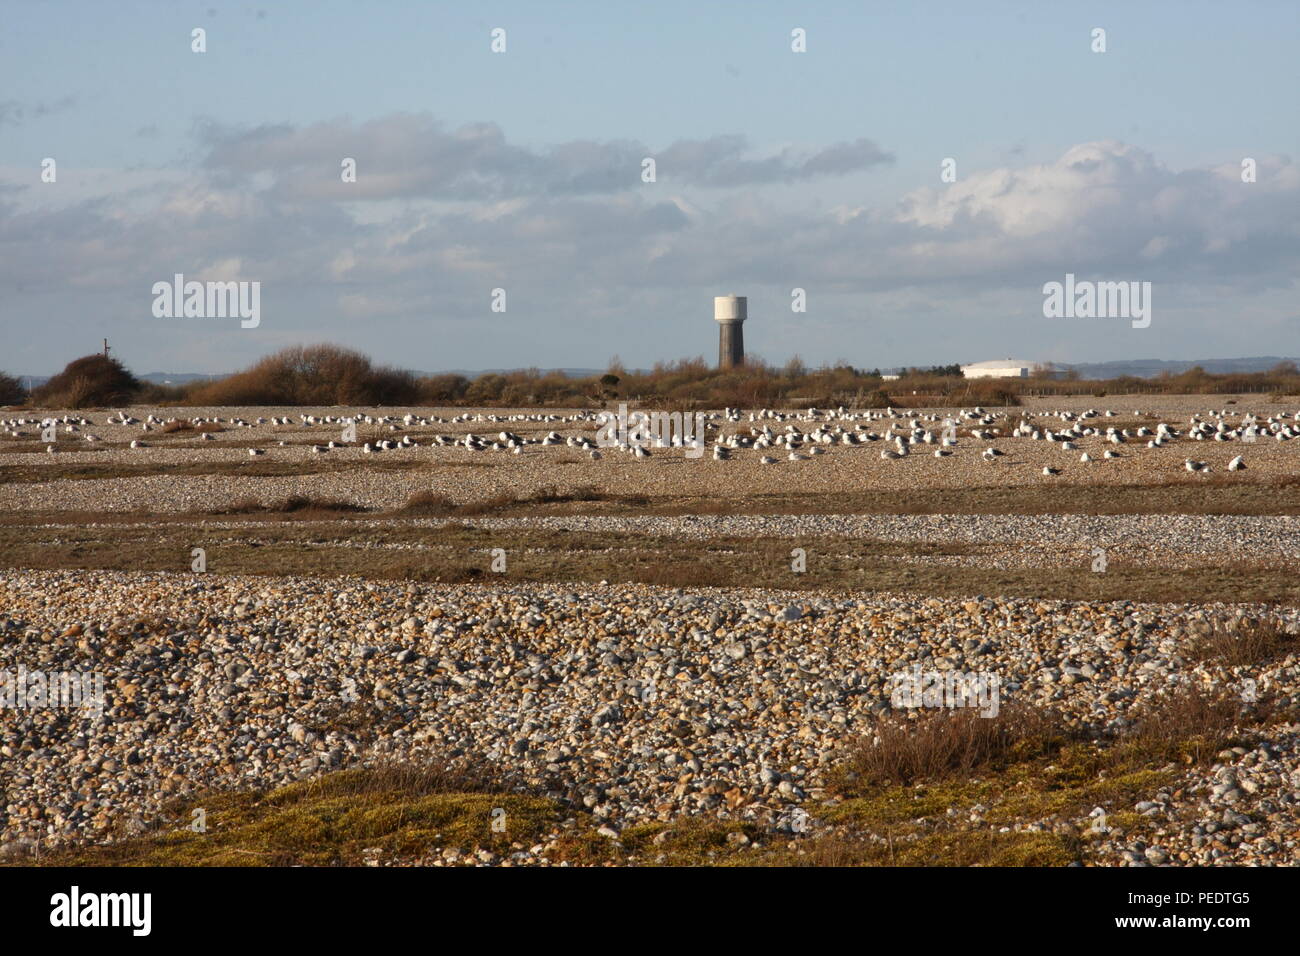 Gull roost at Dungerness Bird Reserve, with light shrubland on a shingle landscape, and the water tower in the background Stock Photo